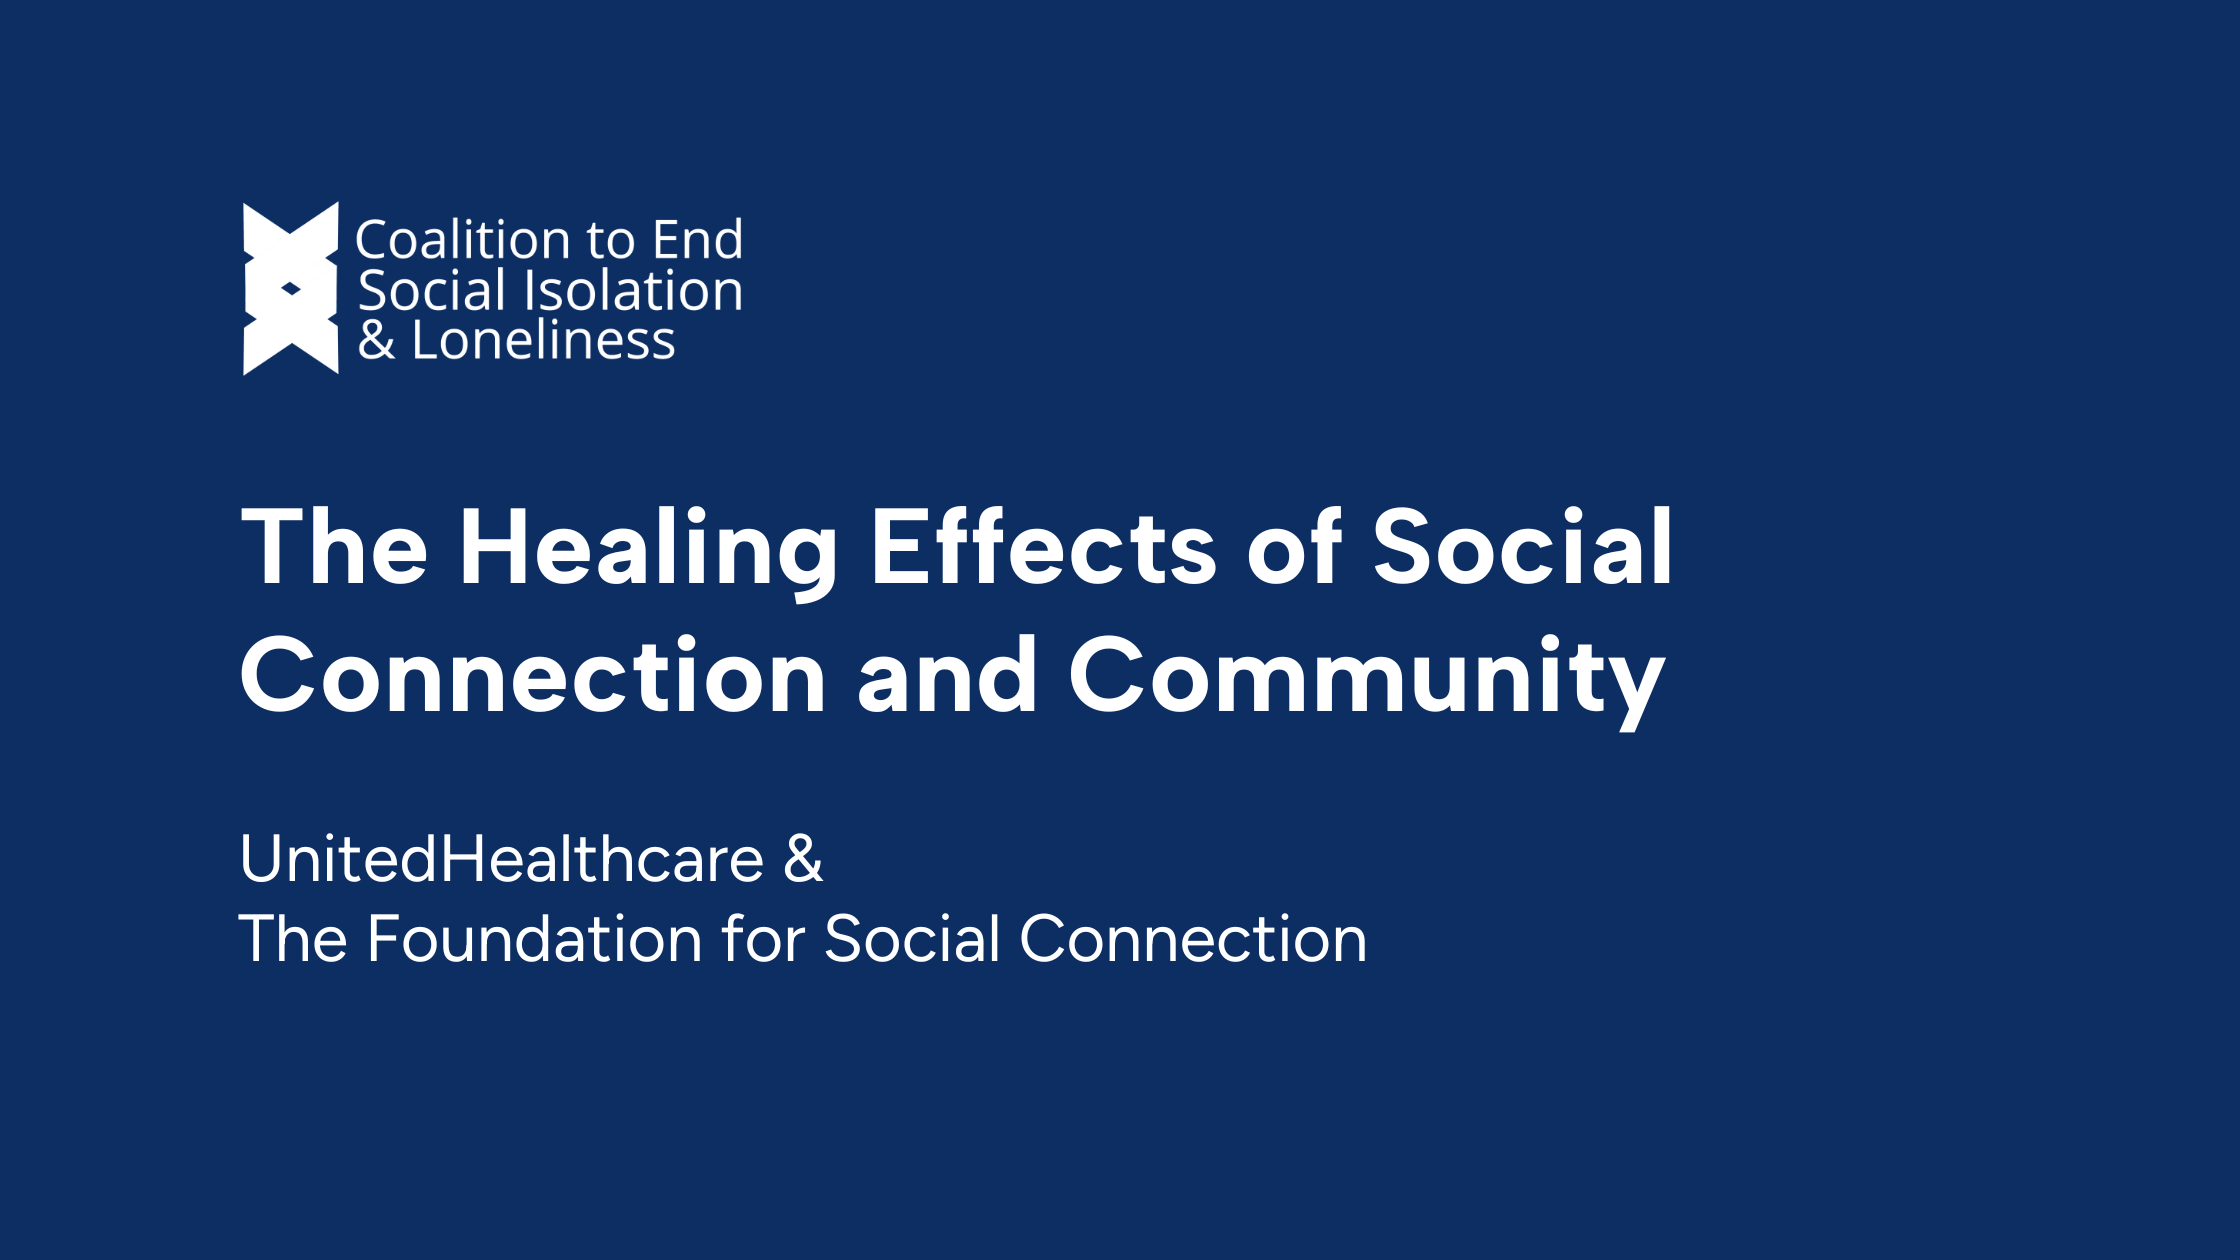 The Healing Effects of Social Connection and Community